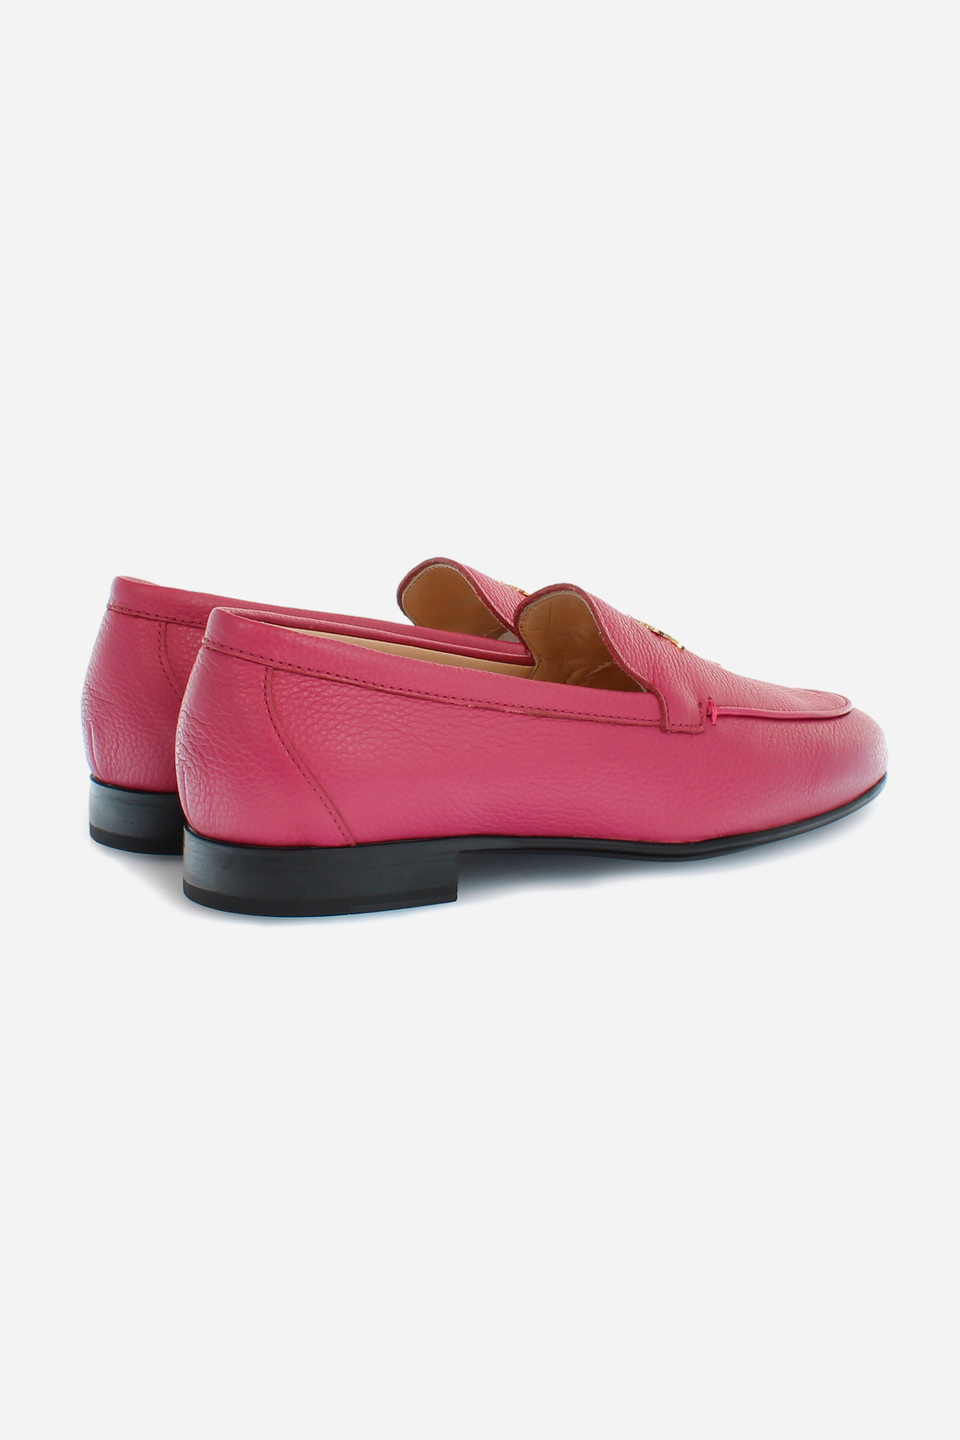 Women's leather loafers | La Martina - Official Online Shop